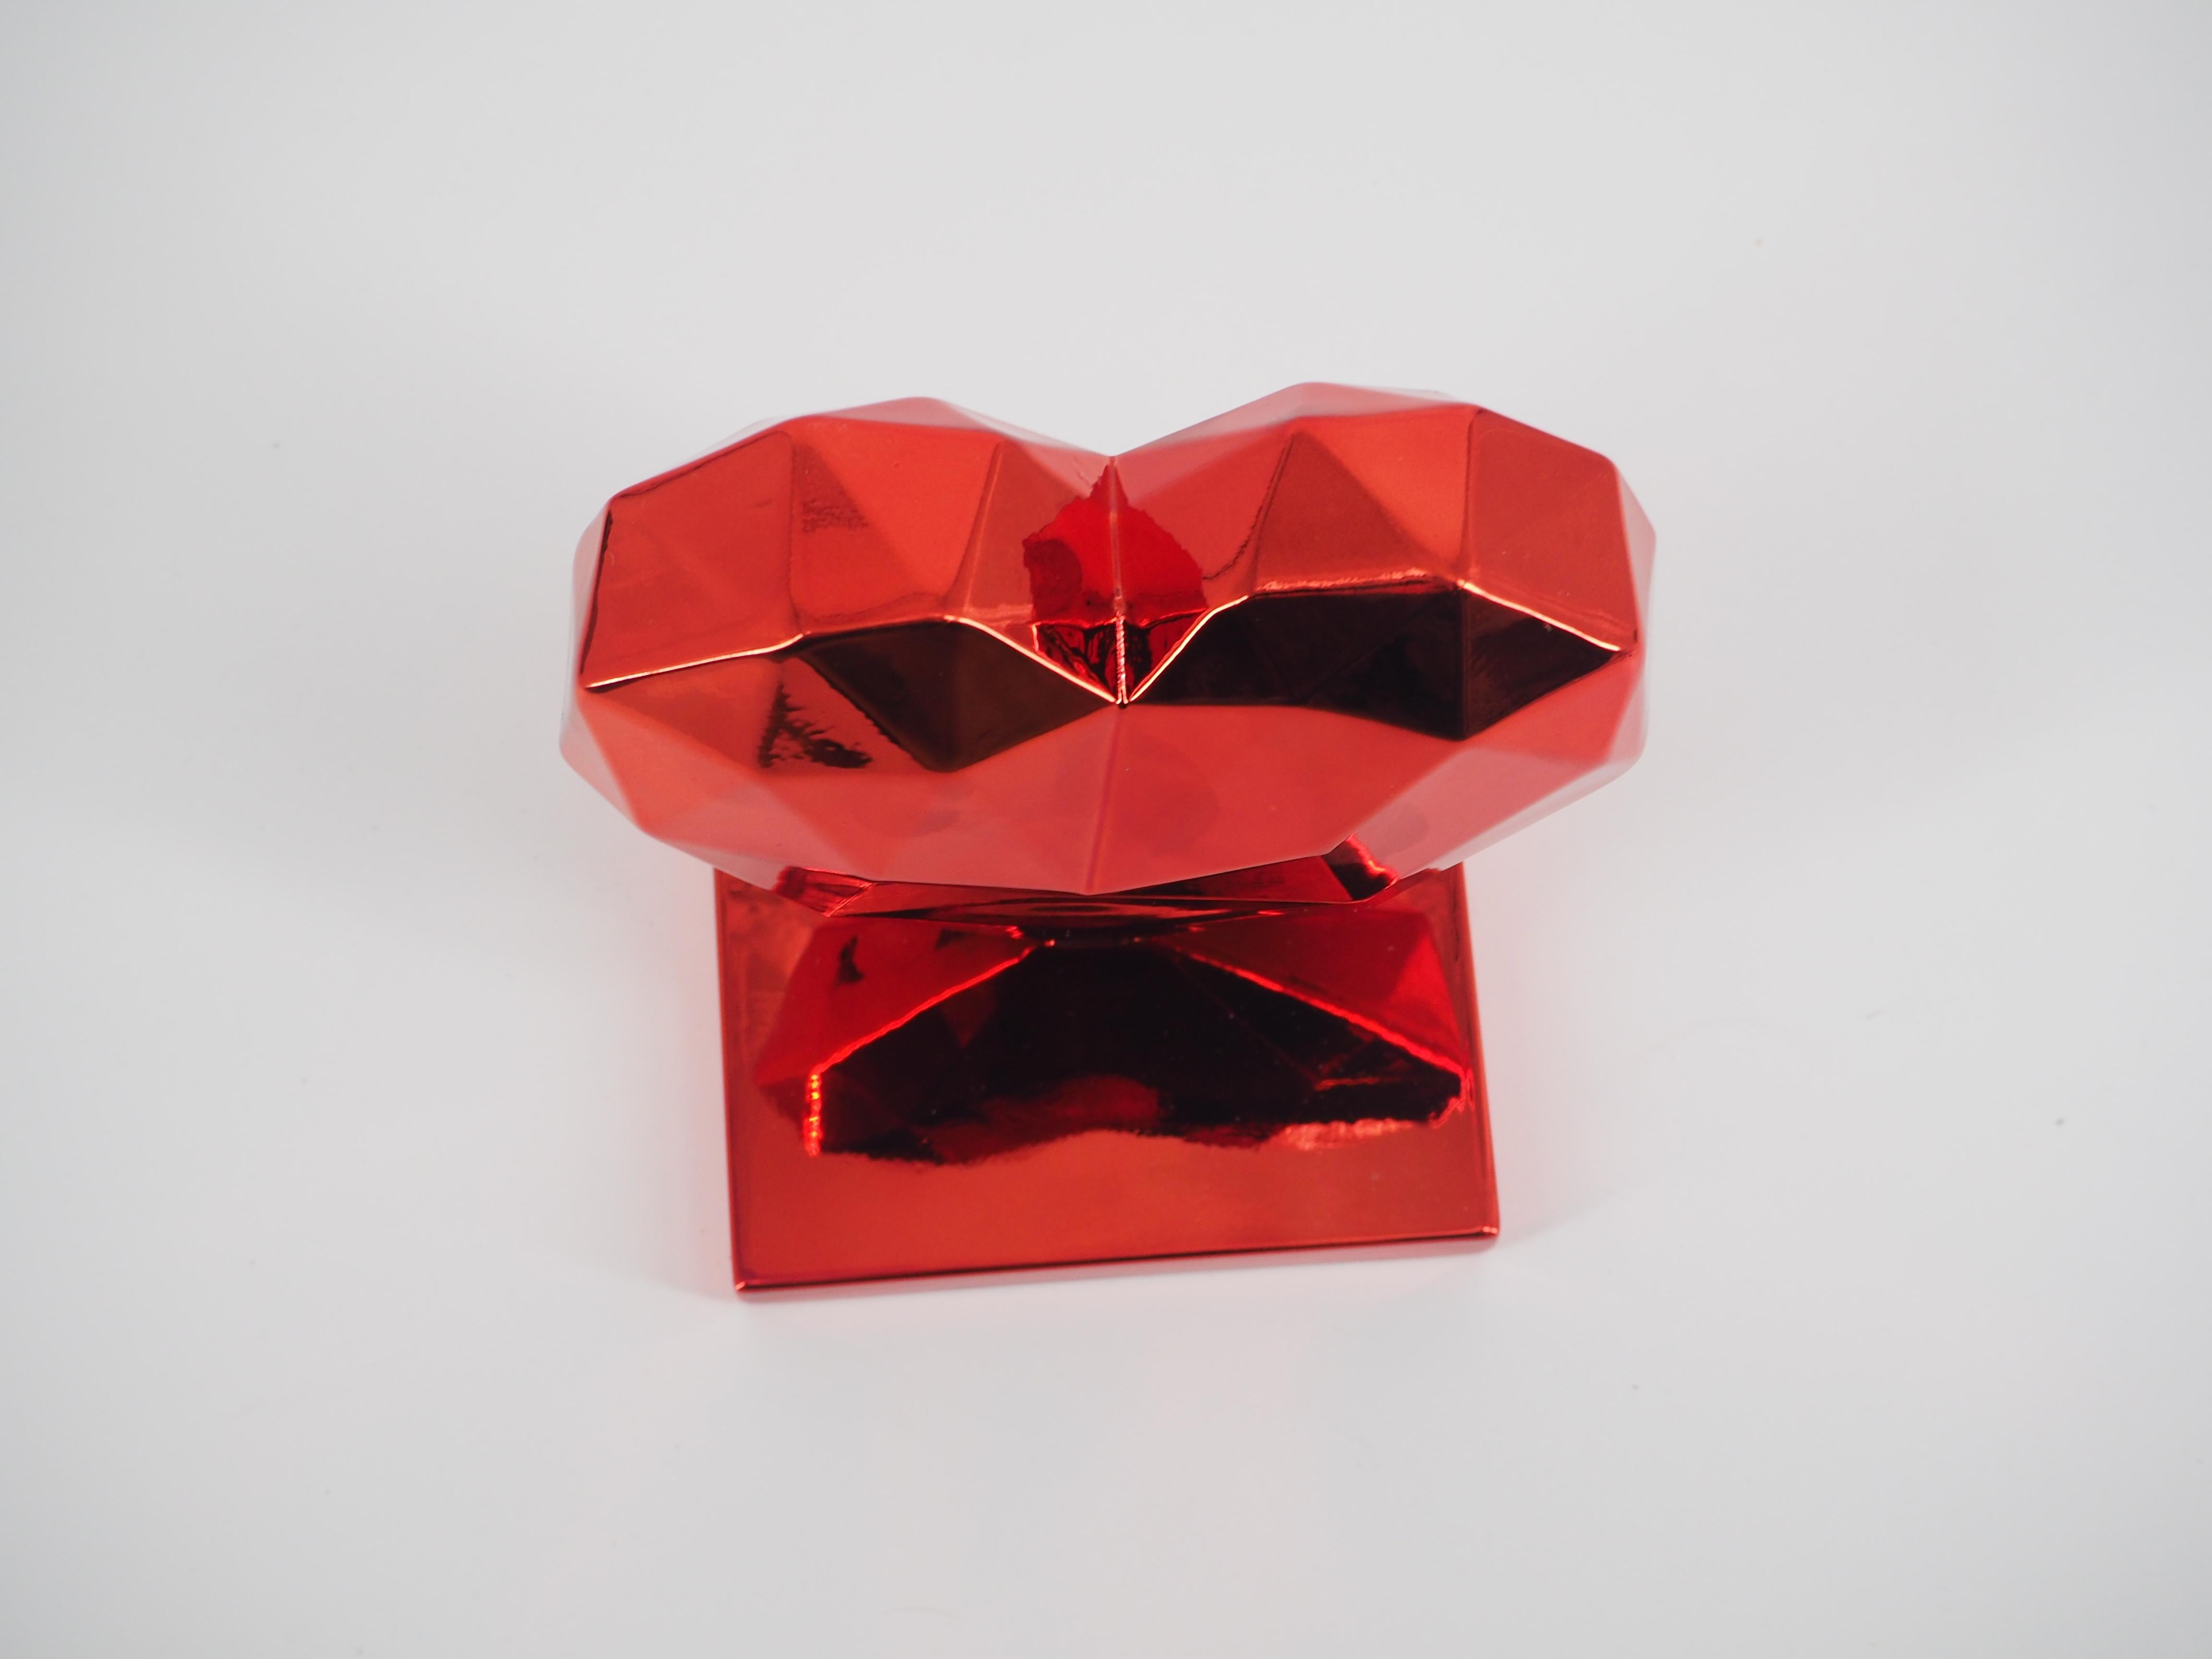 Richard ORLINSKI
Heart Spirit (Red Edition)

Sculpture in resin
Metallic Red
About 12 x 12 x 10 cm (c. 4.7 x 4.7 x 3.9 in)
Presented in original box with certificate

Excellent condition